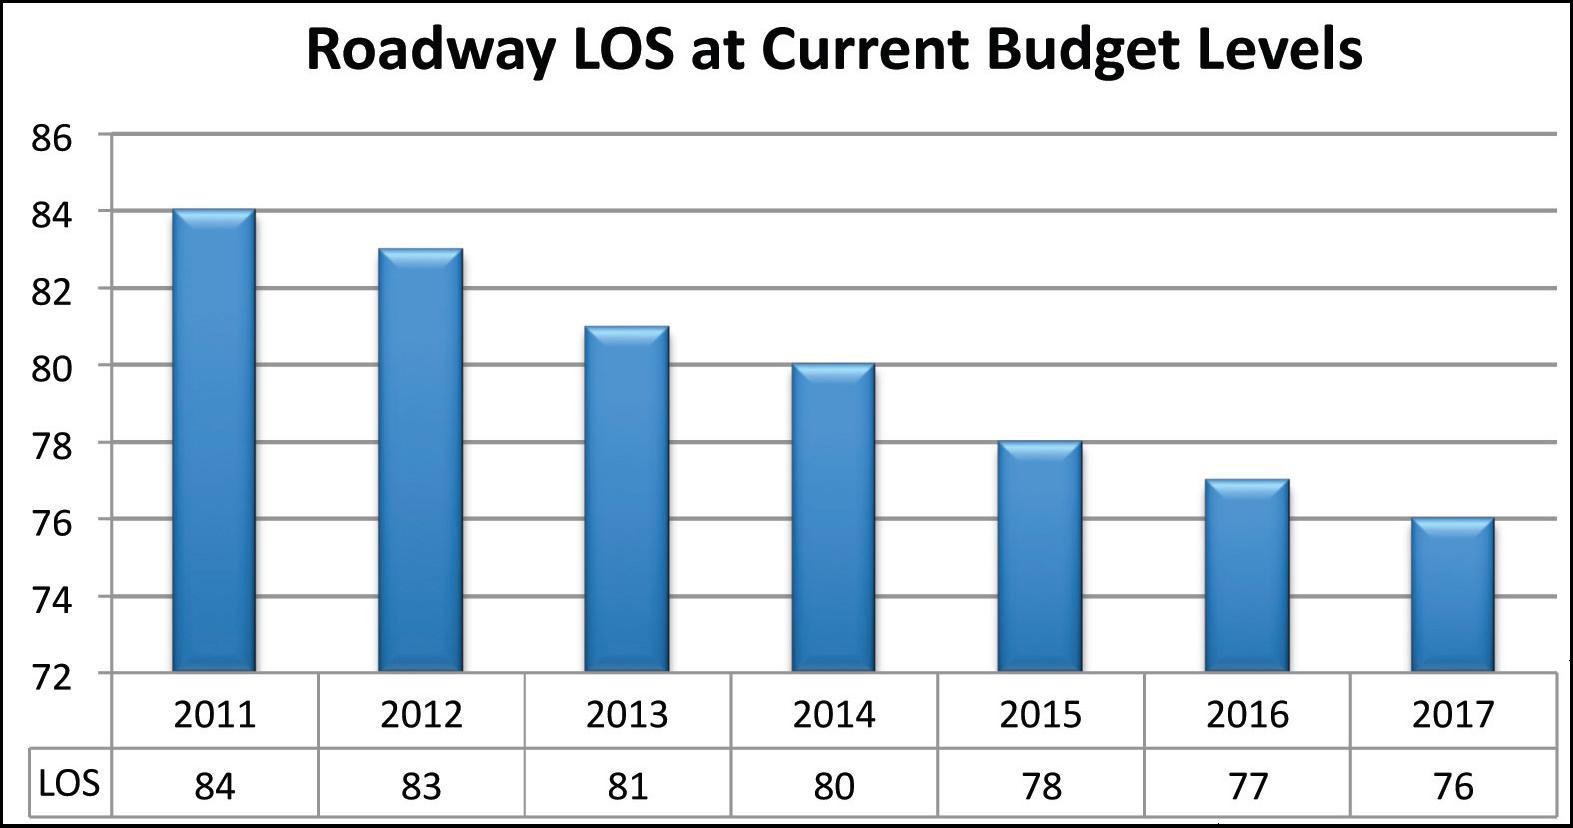 Figure 66 illustrates the overall roadway level of service from 2004 through 2017 if current budget levels continue. The overall roadway level of service is at 84 in 2011 and falls steadily until it reaches 76 in 2017.